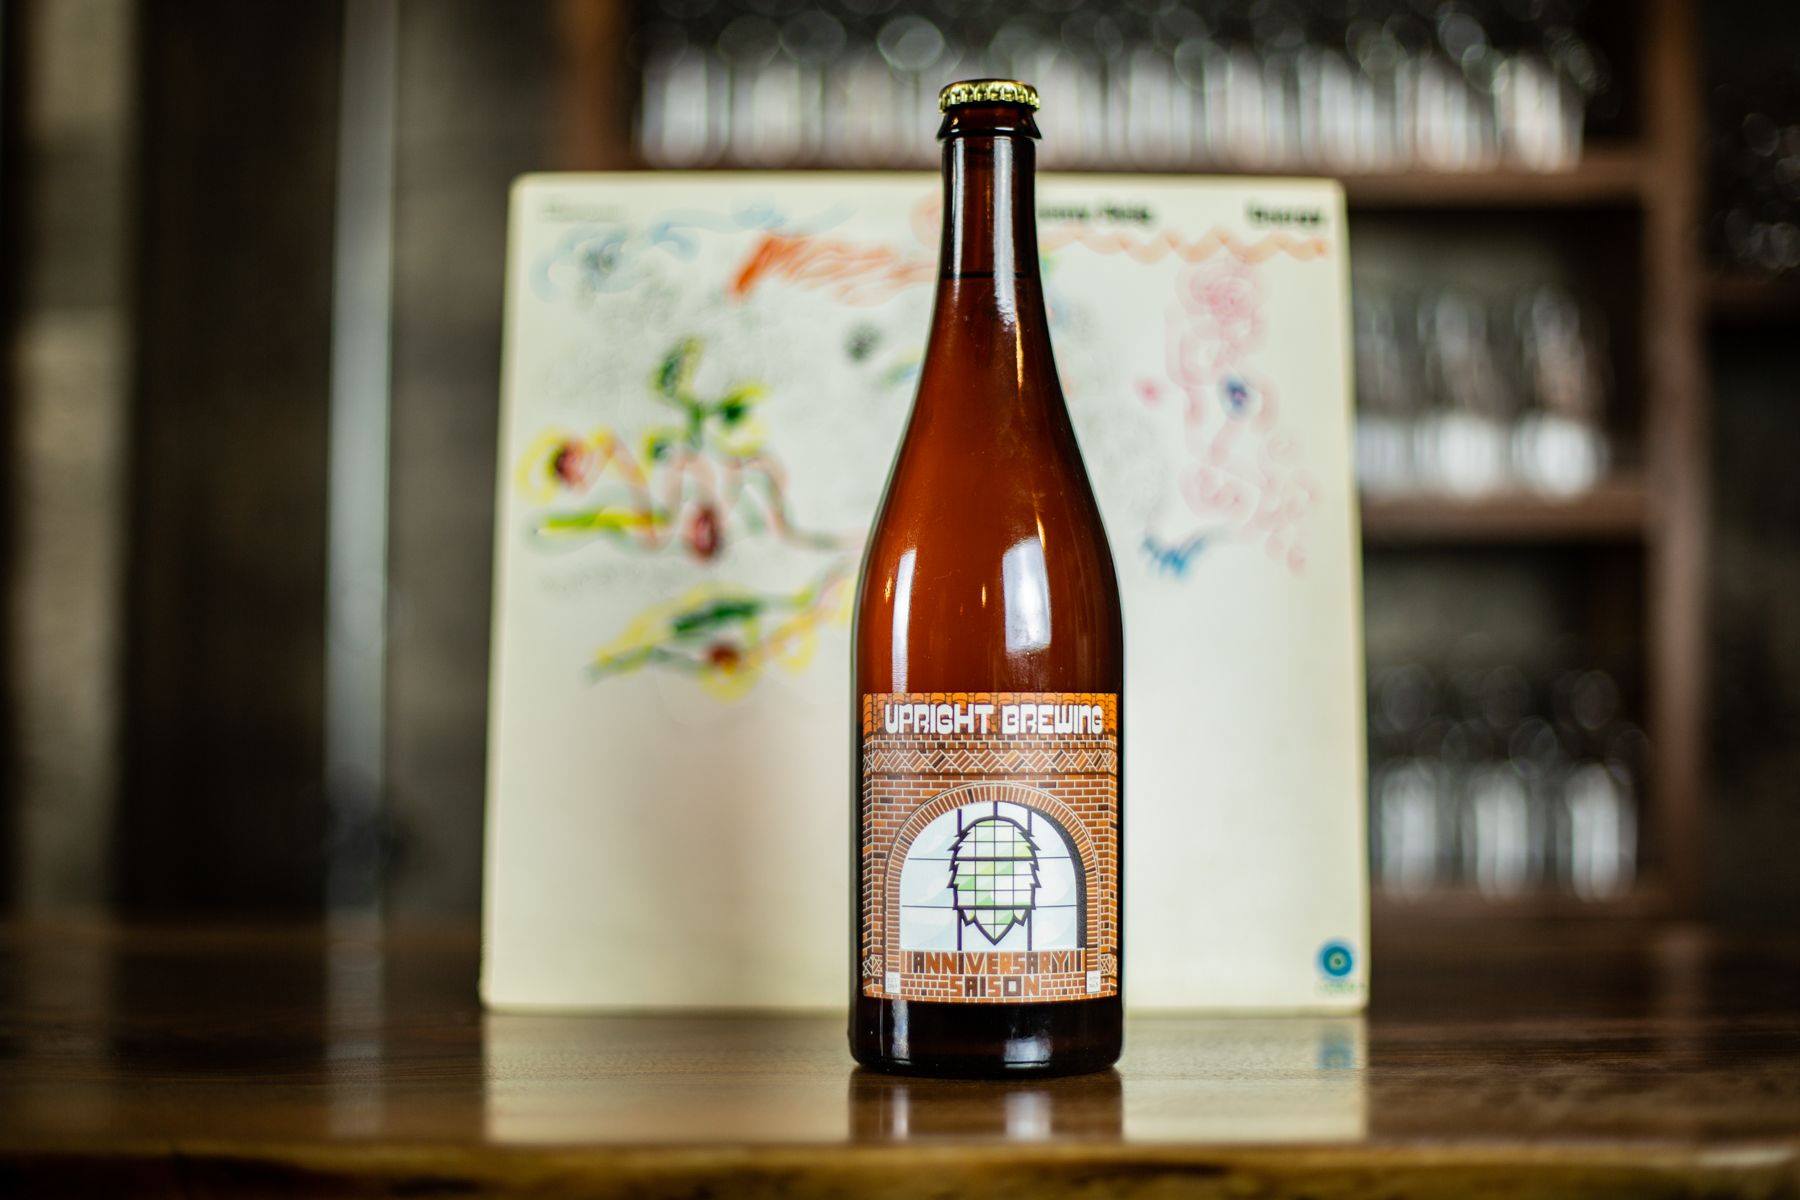 image of Upright Brewing's 10th Anniversary Saison in a 750mL bottle courtesy of Upright Brewing